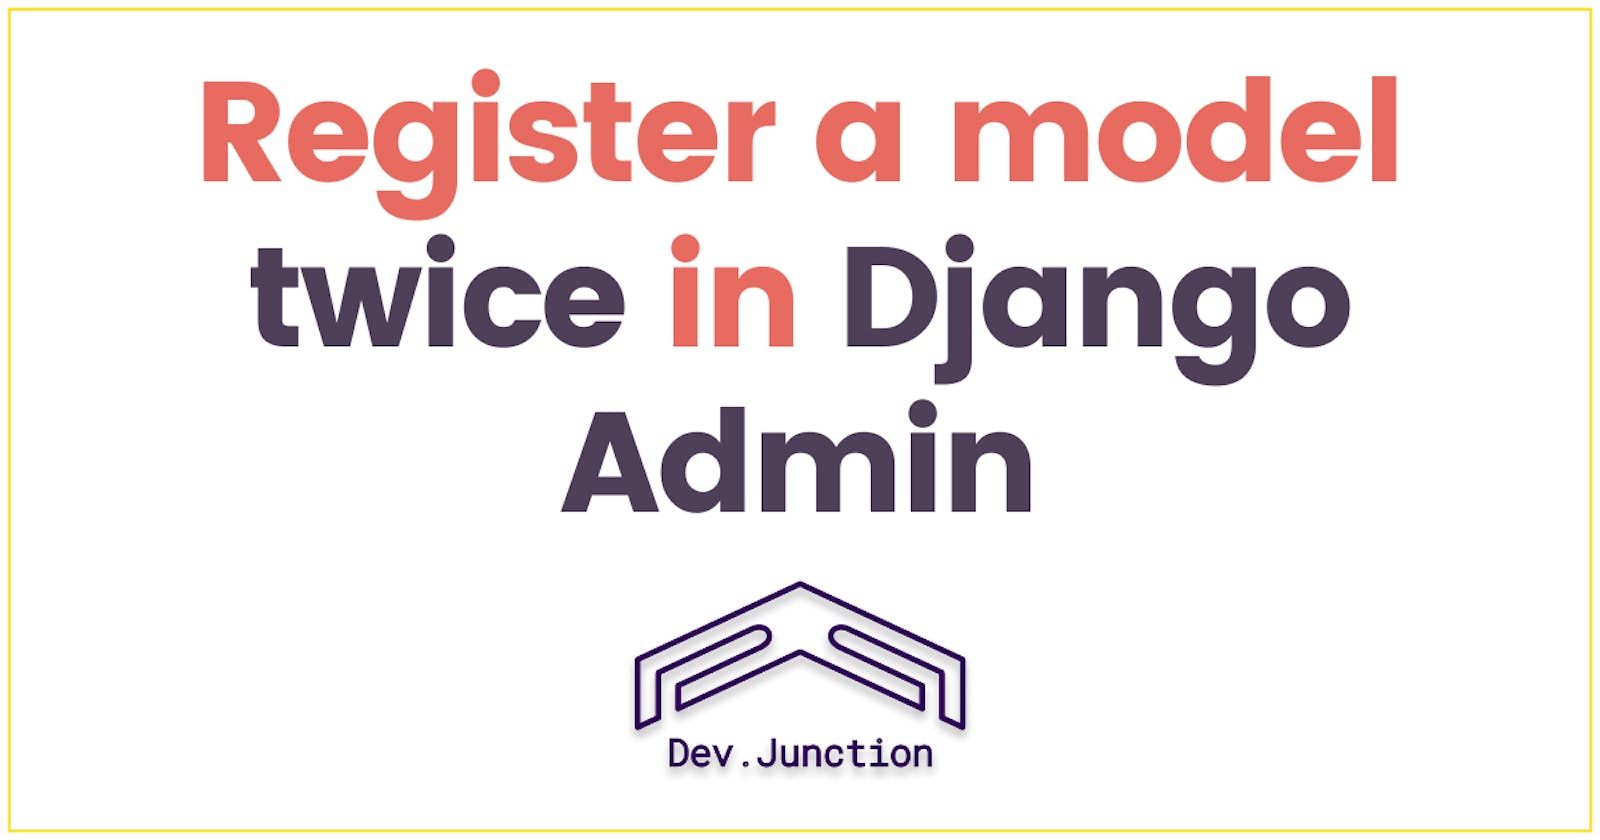 How to register a model twice in the Django admin?